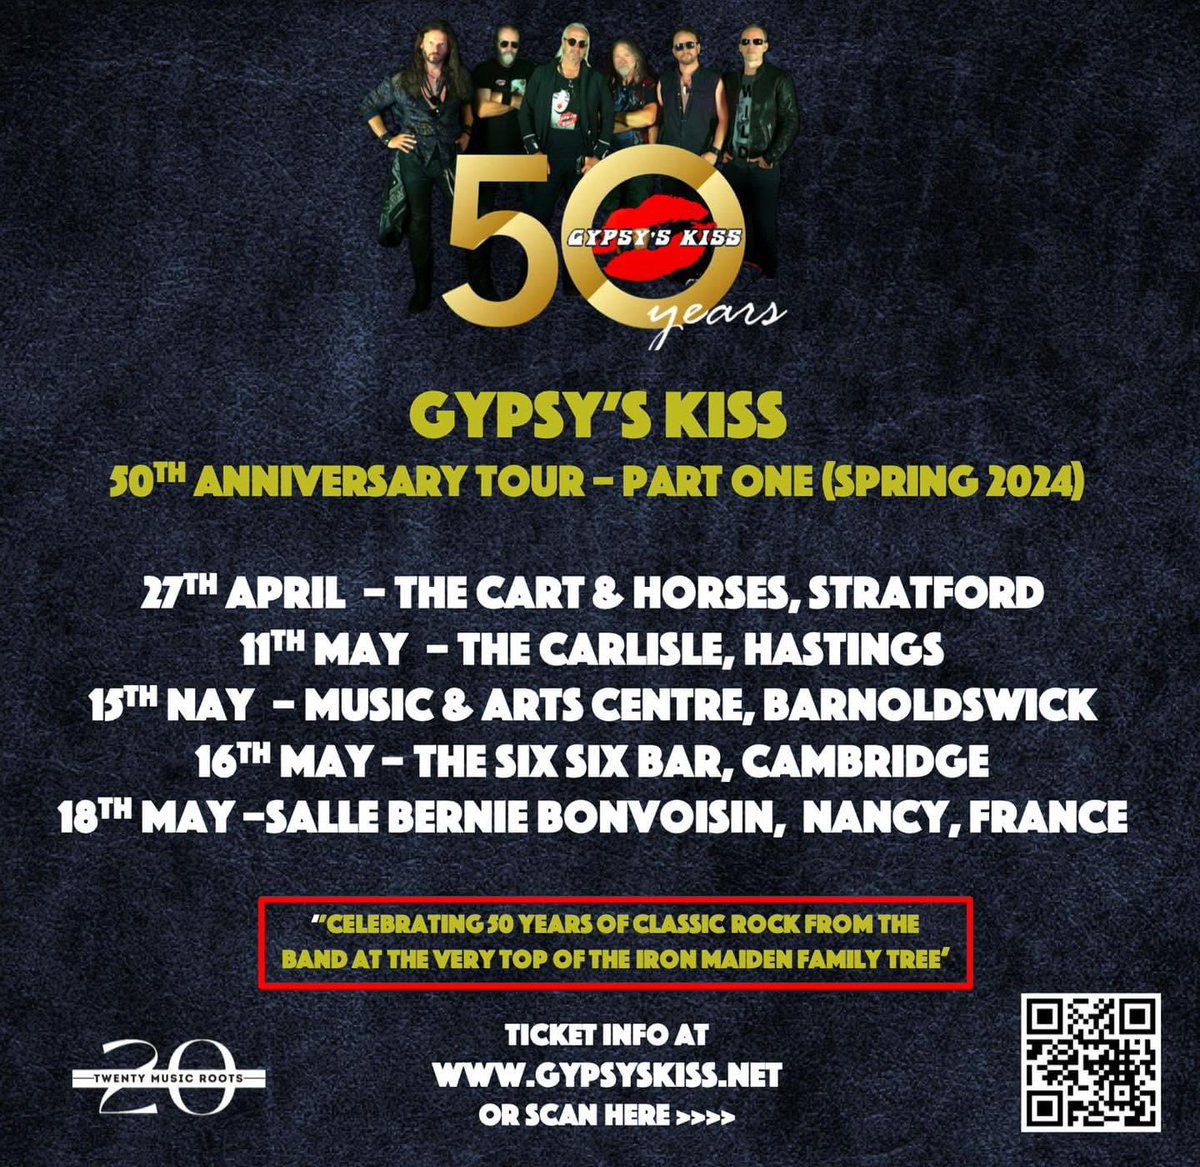 We are really excited to confirm the first leg of Gypsy’s Kiss’ 50th Anniversary Tour (Spring 2024). Tickets /Information for all of the gigs on the tour can be found at gypsyskiss.net Details of the next part of the tour will be announced soon.